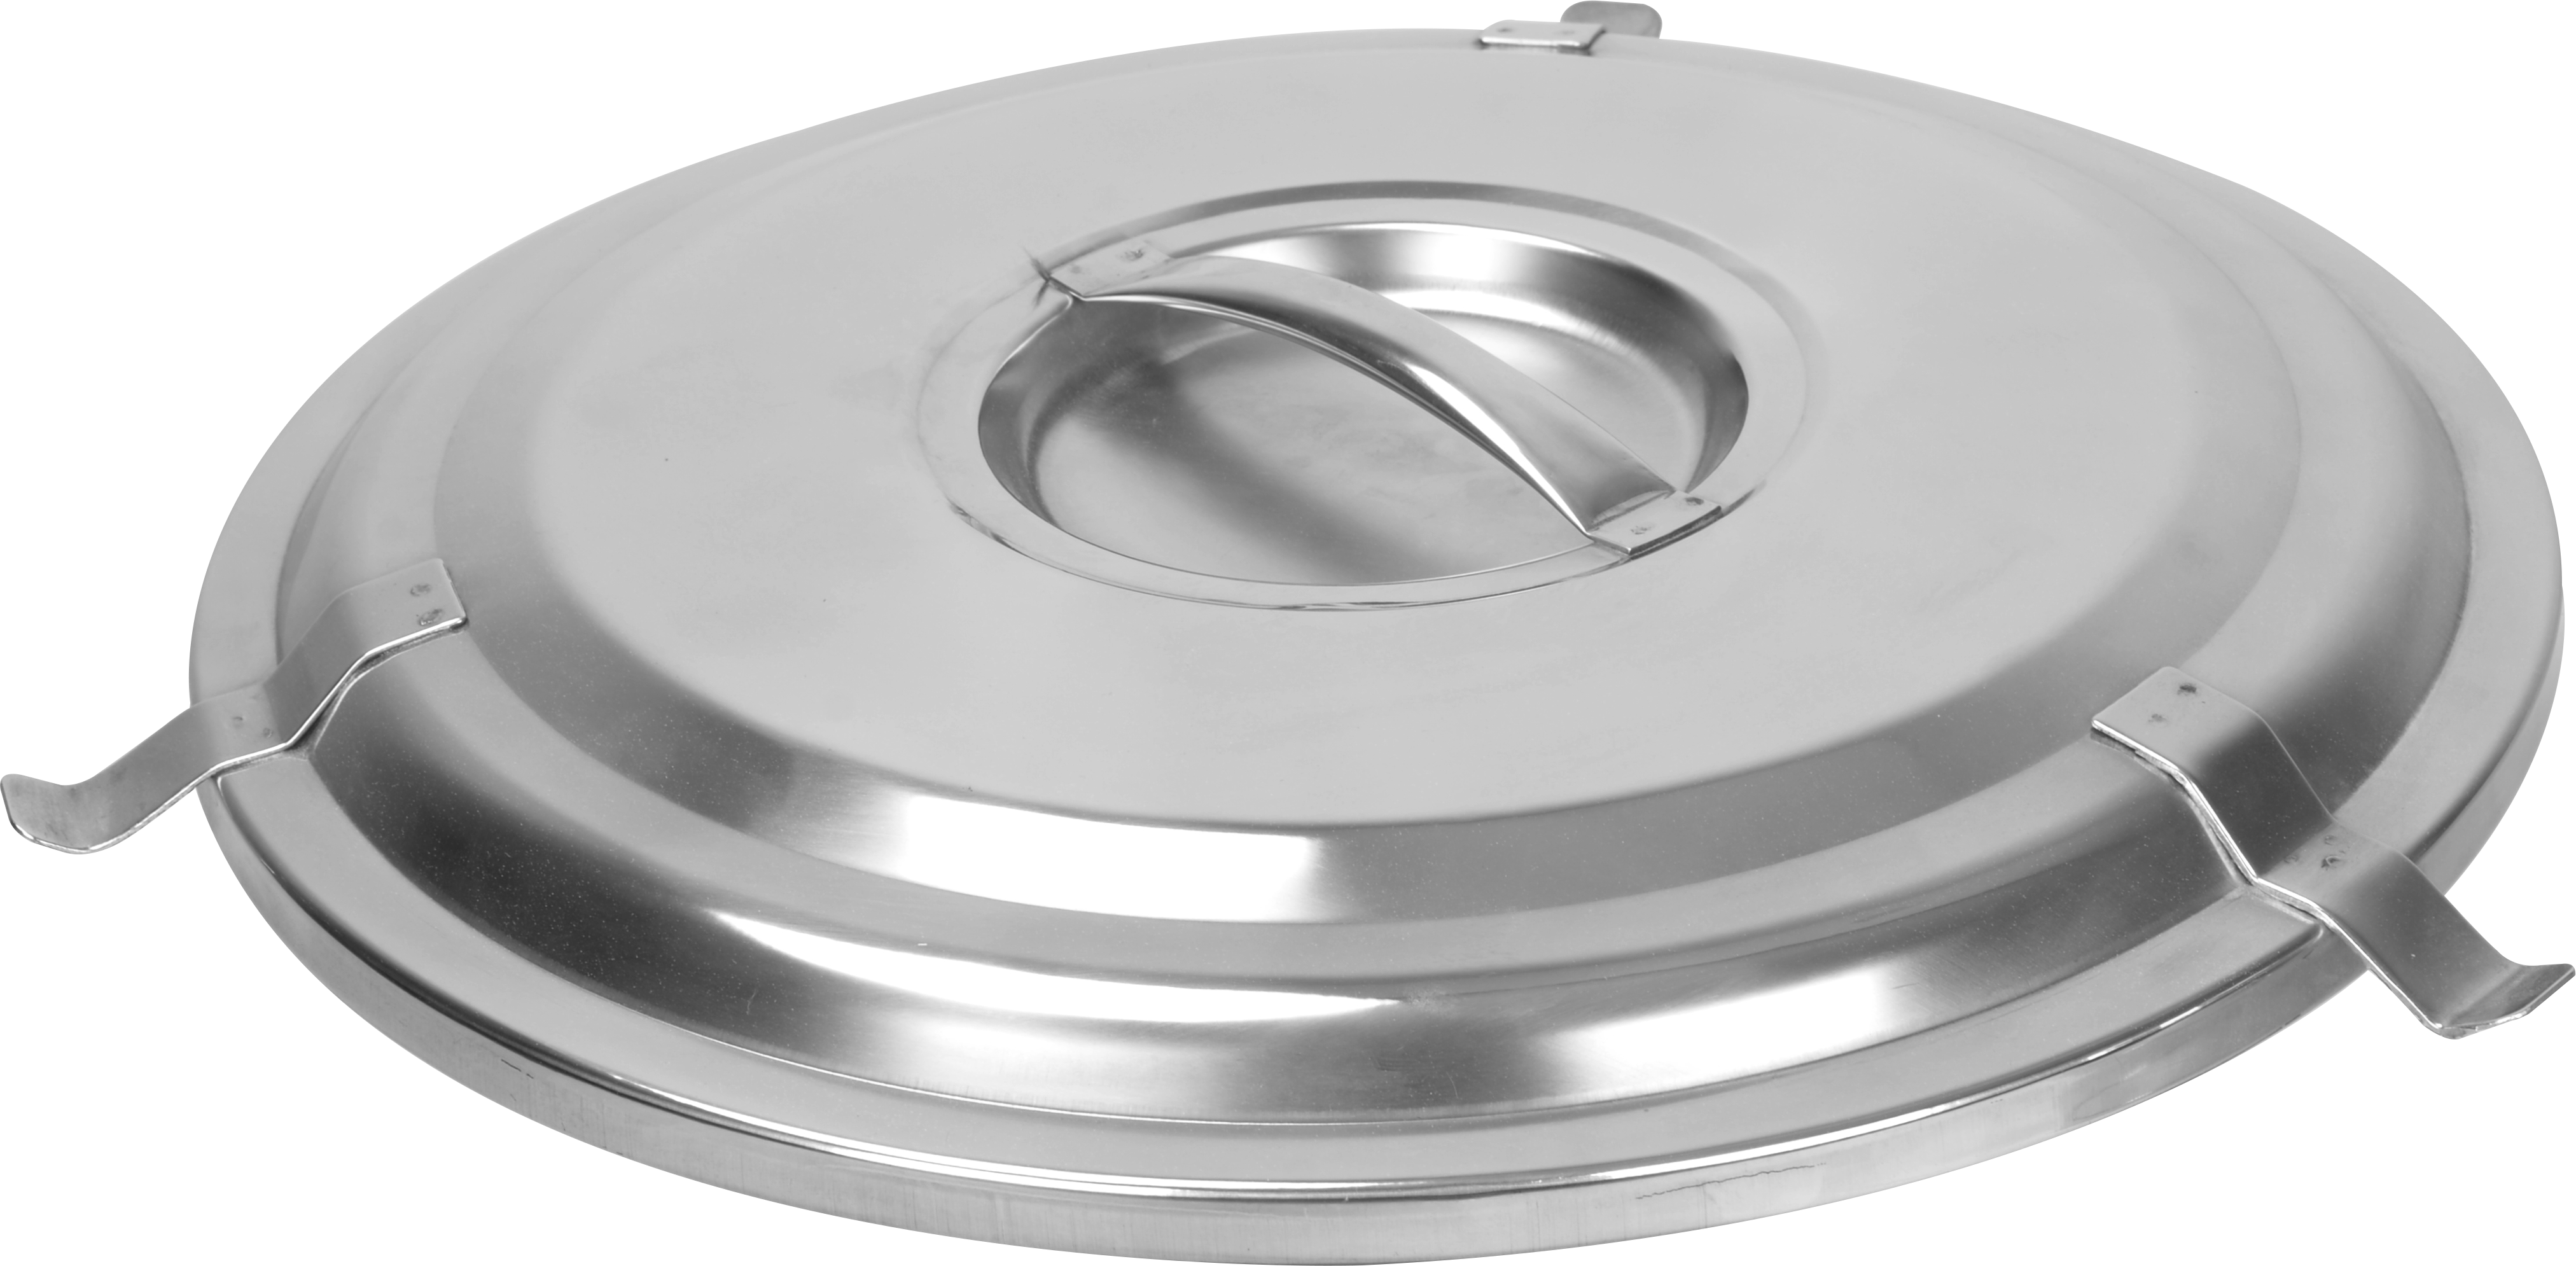 Stainless Steel Heat Preservation Barrel(with One Tap)